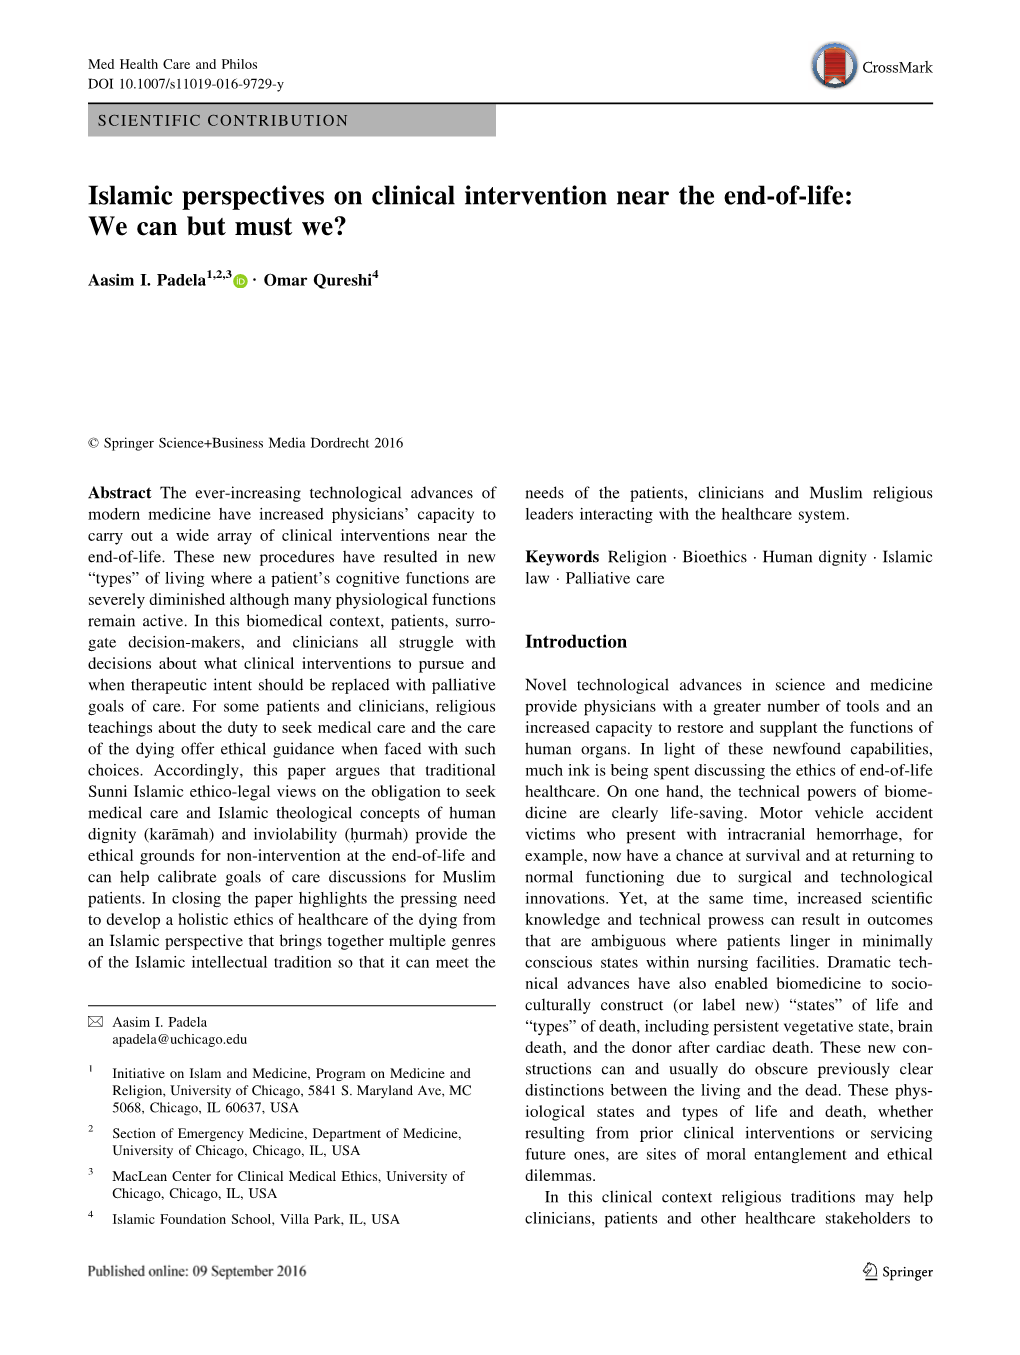 Islamic Perspectives on Clinical Intervention Near the End-Of-Life: We Can but Must We?